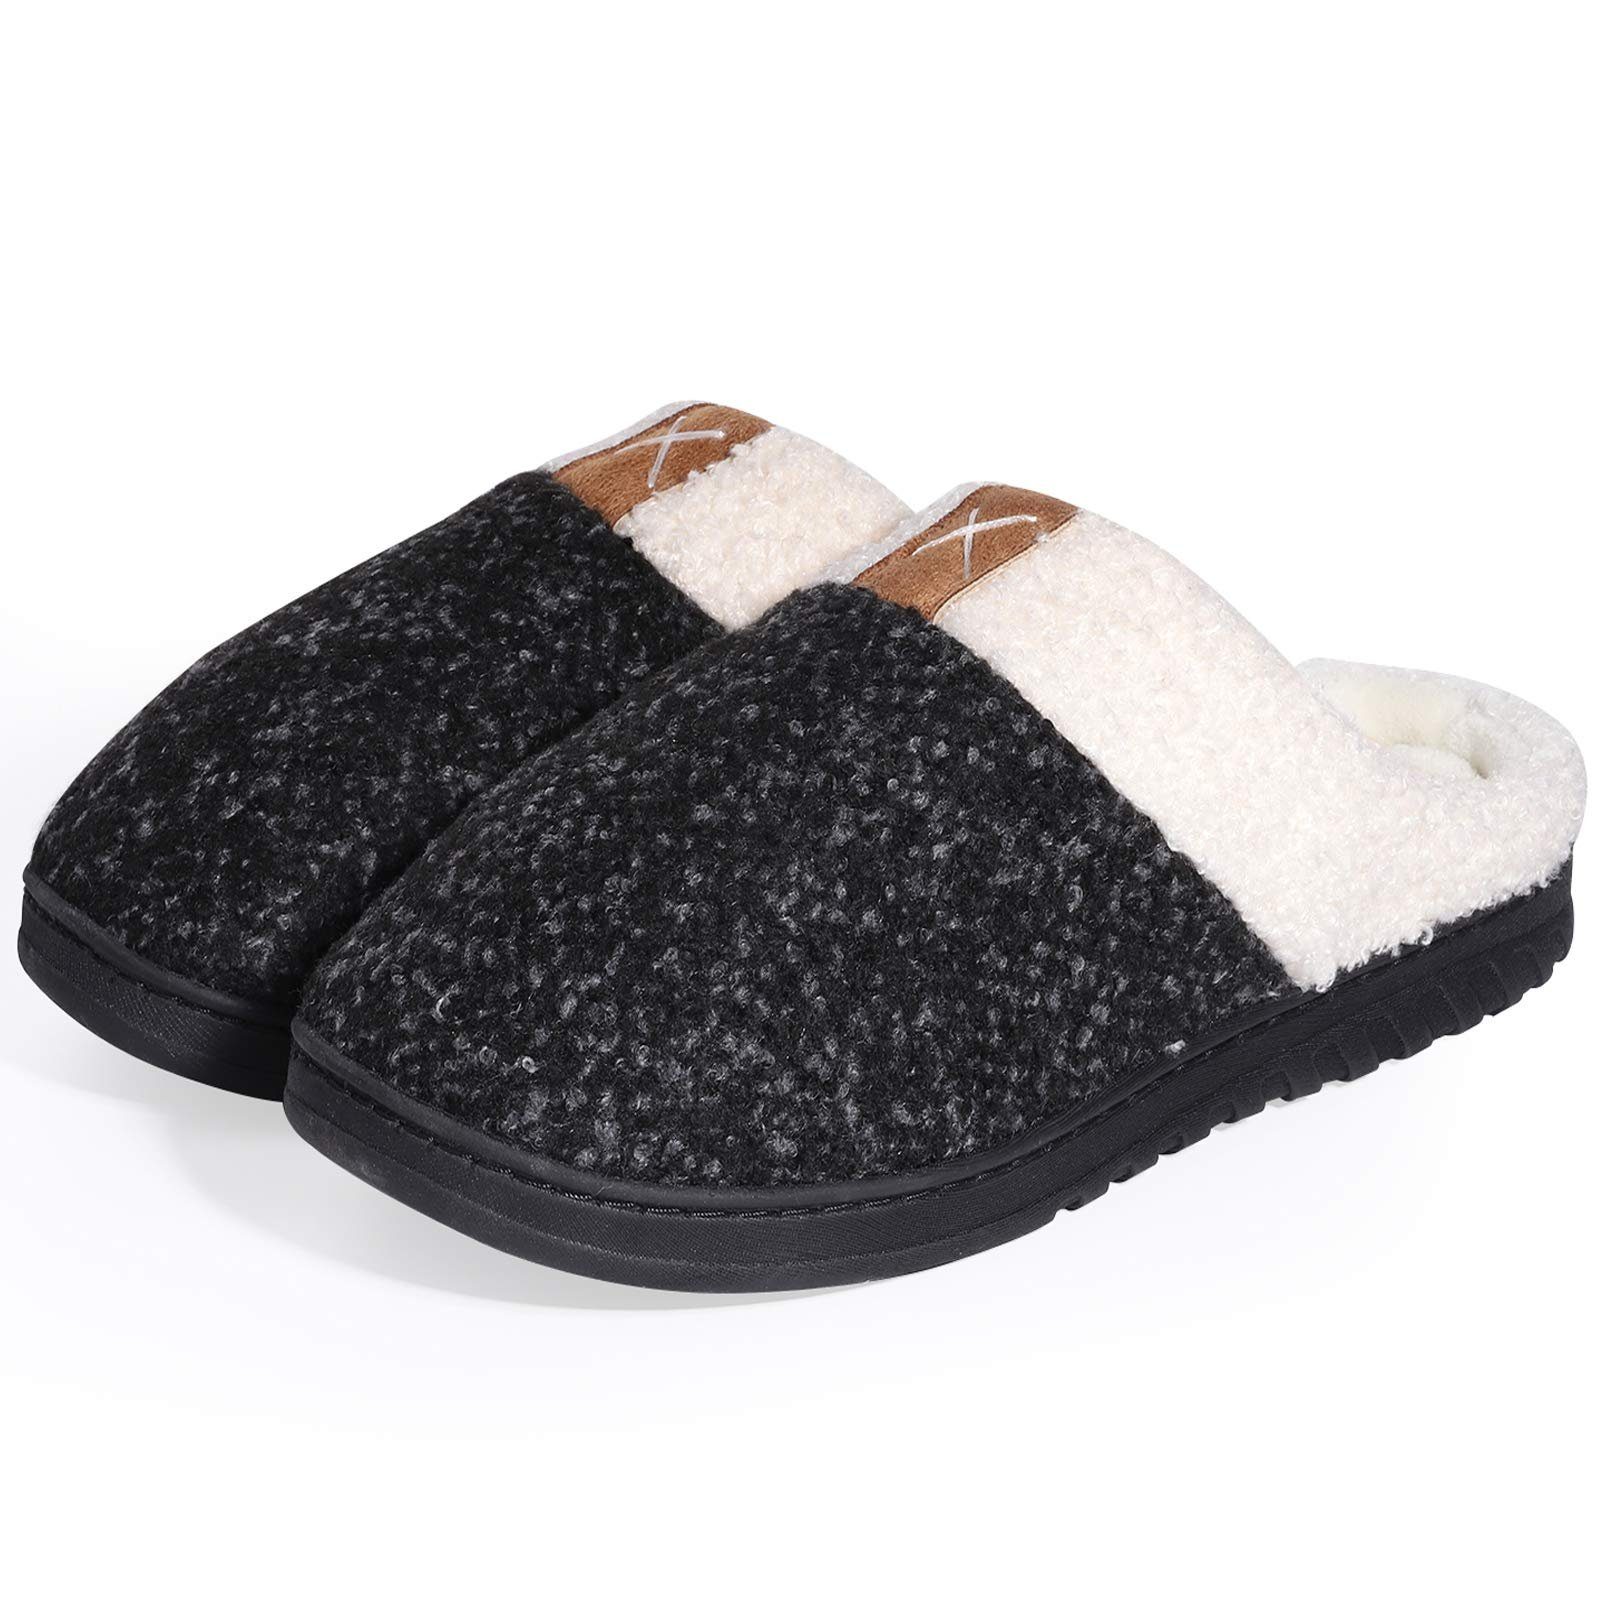 Housruse Warm winter slippers with memory foam and non-slip rubber sole  Plüsch Hausschuhe